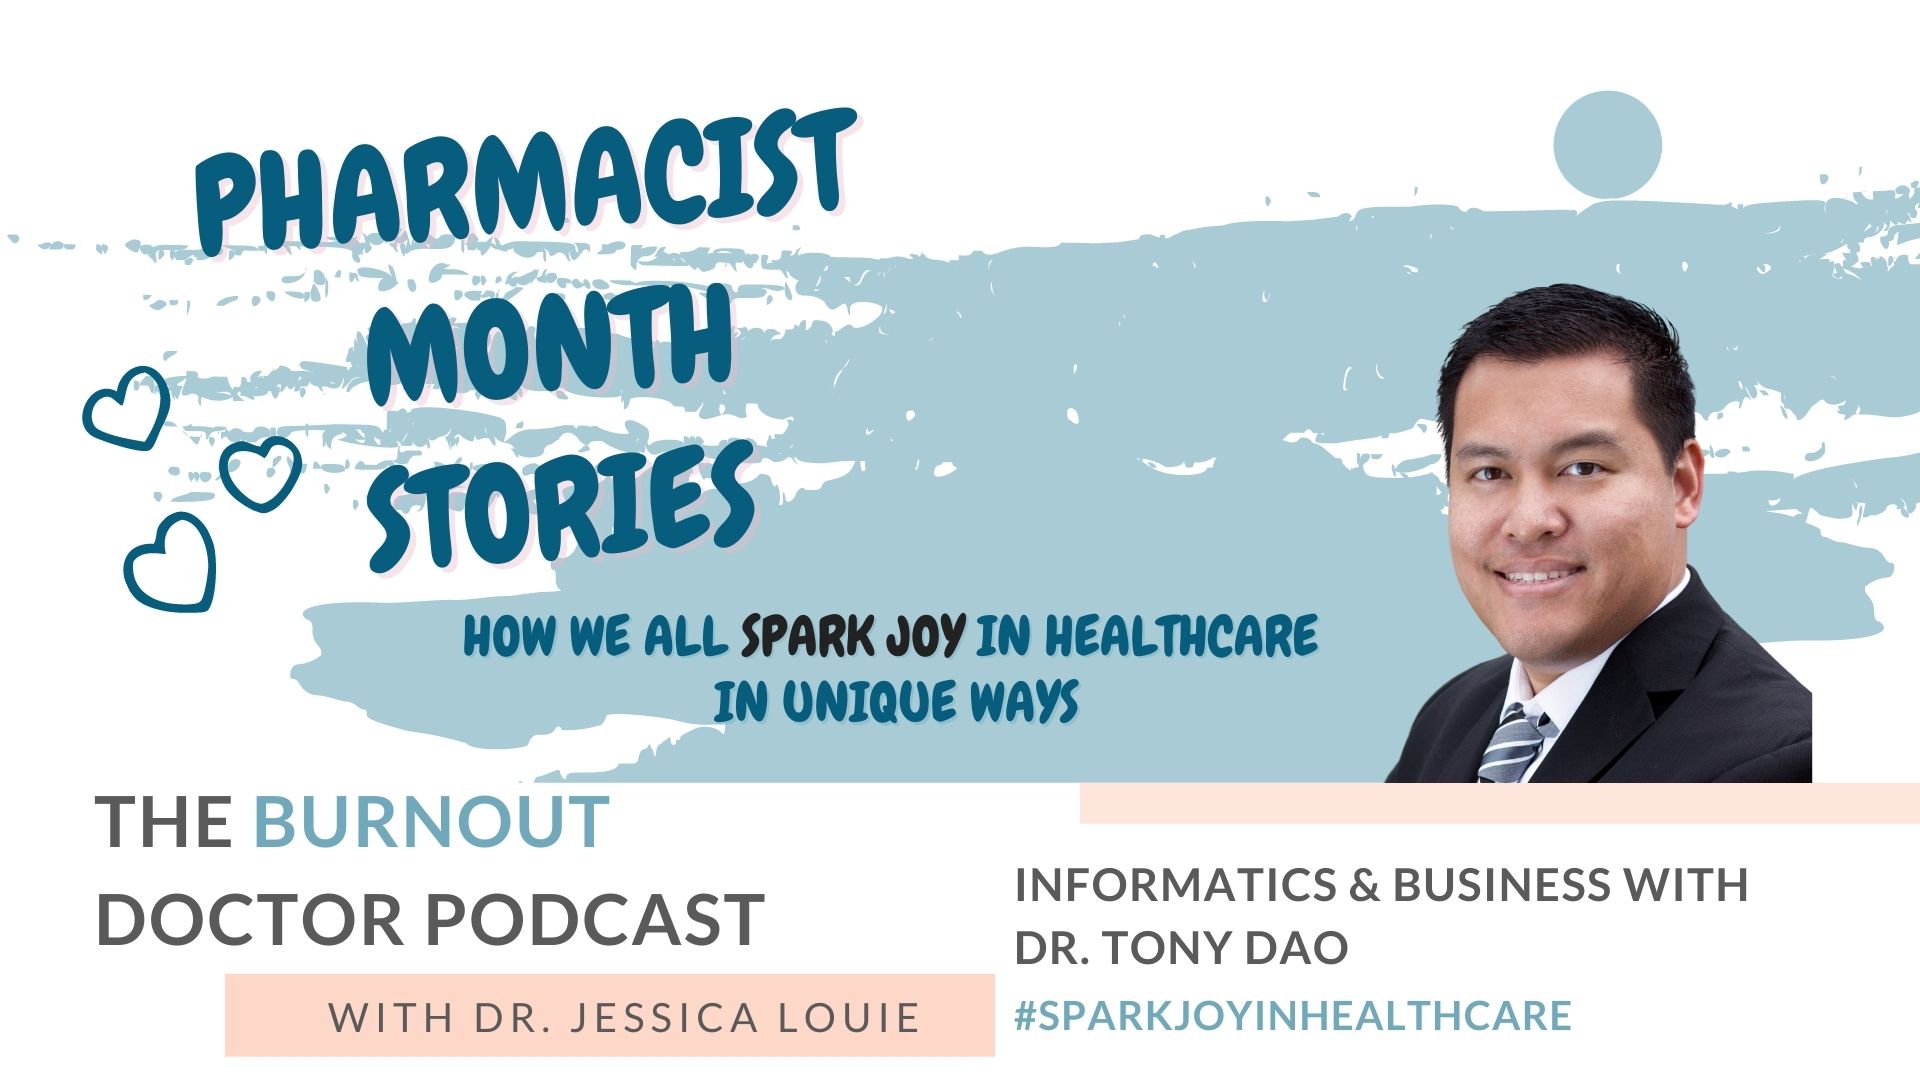 Dr. Tony Dao on The Burnout Doctor Podcast with Dr. Jessica Louie. Pharmacist burnout stories. Informatics pharmacist journey and advice. Entrepreneurship in pharmacy. Spark Joy in Healthcare. #joyatwork